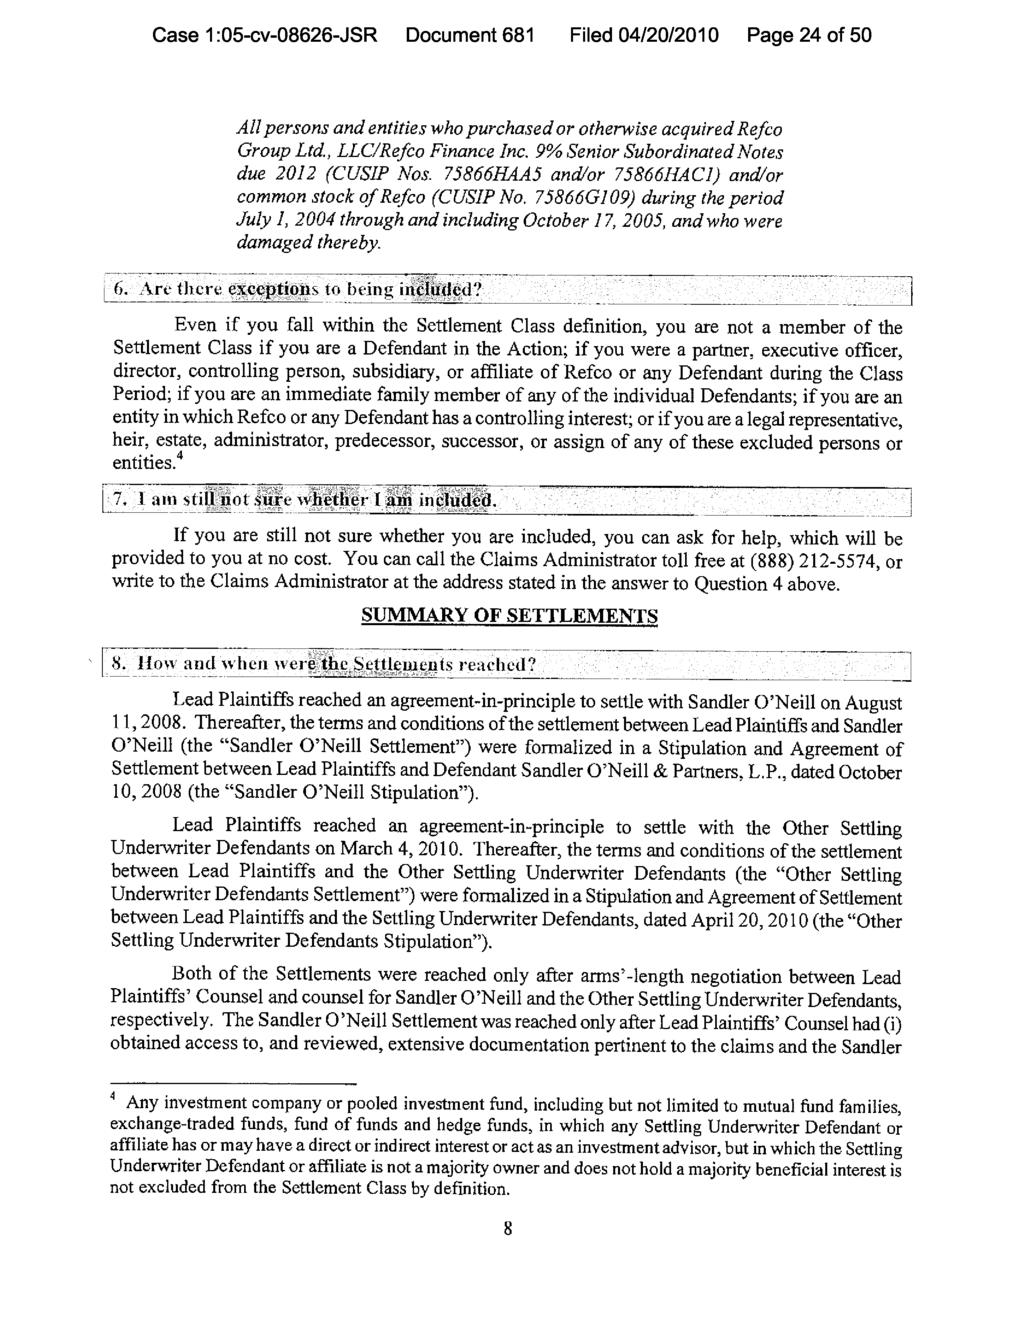 Case 1:05-cv-08626-JSR Document 681 Filed 04/20/2010 Page 24 of 50 All persons and entities who purchased or otherwise acquired Refco Group Ltd., LLCIRefco Finance Inc.